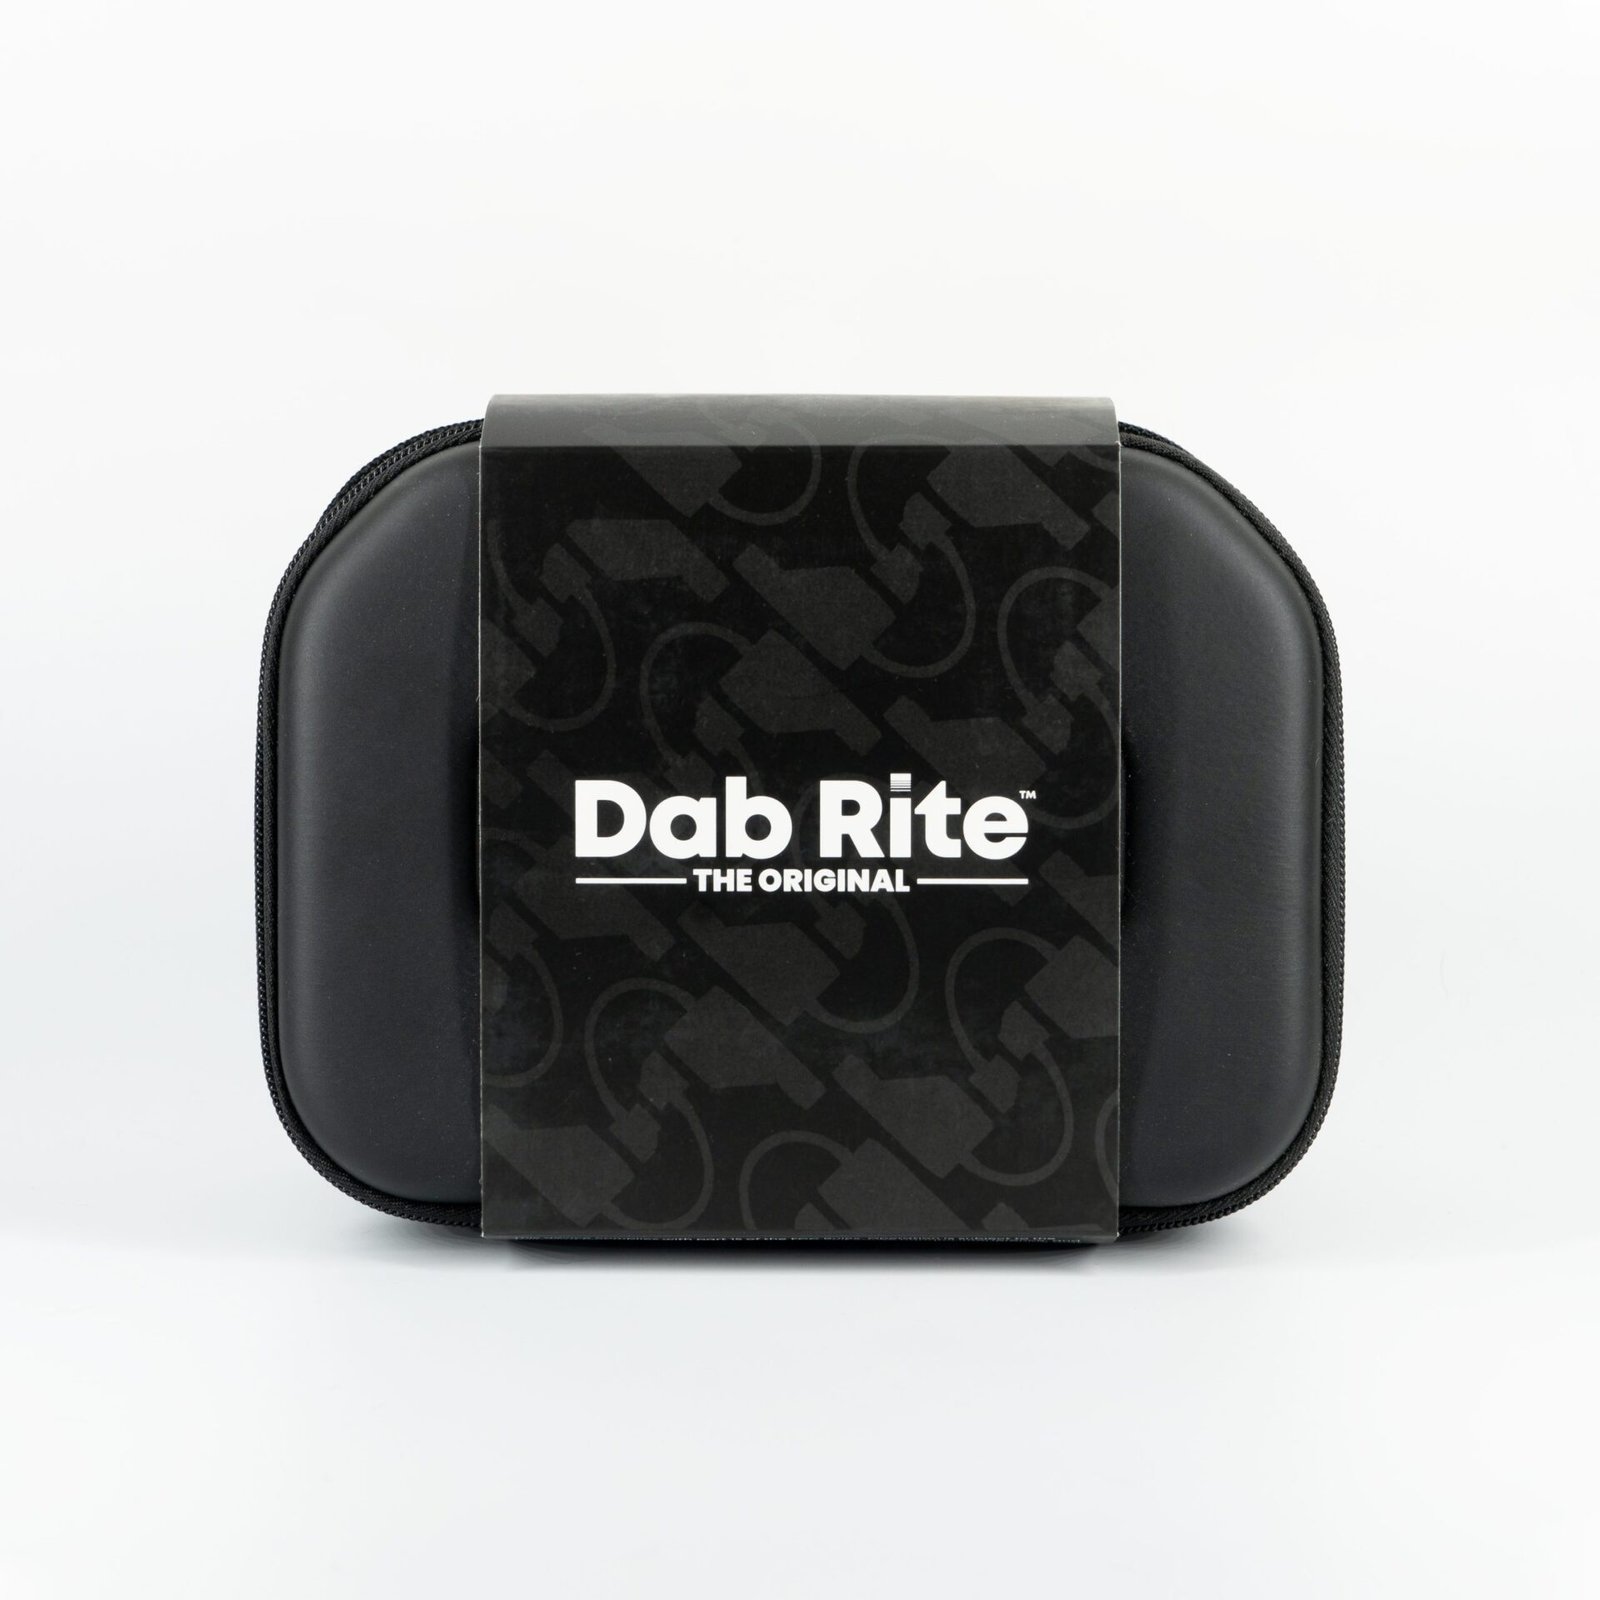 Dab Rite - Dab Rite updated their cover photo.